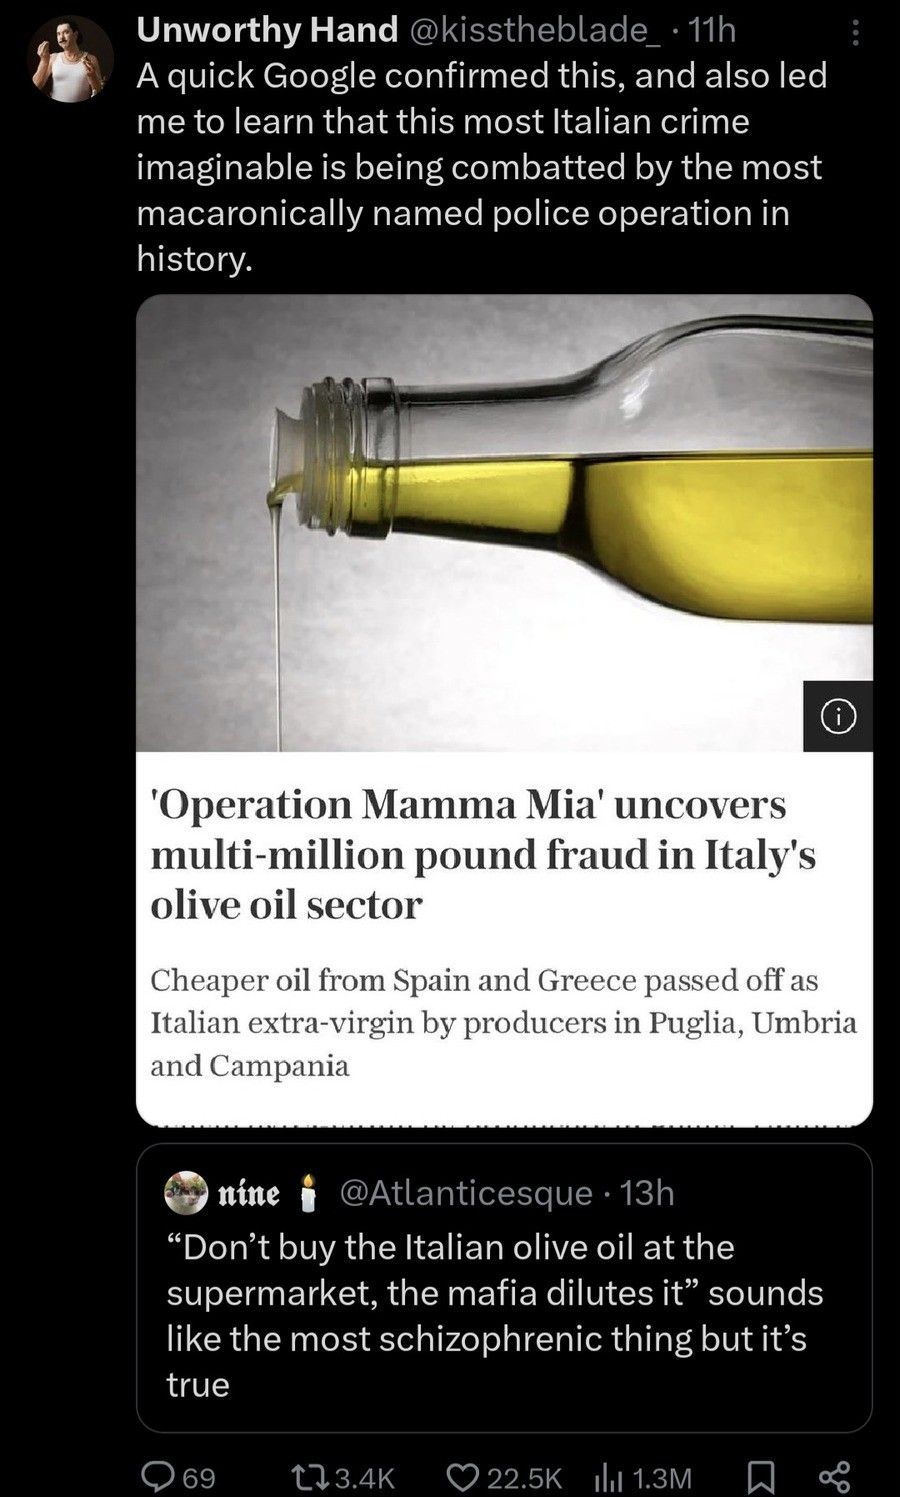 They actually unvirgined the olive oil